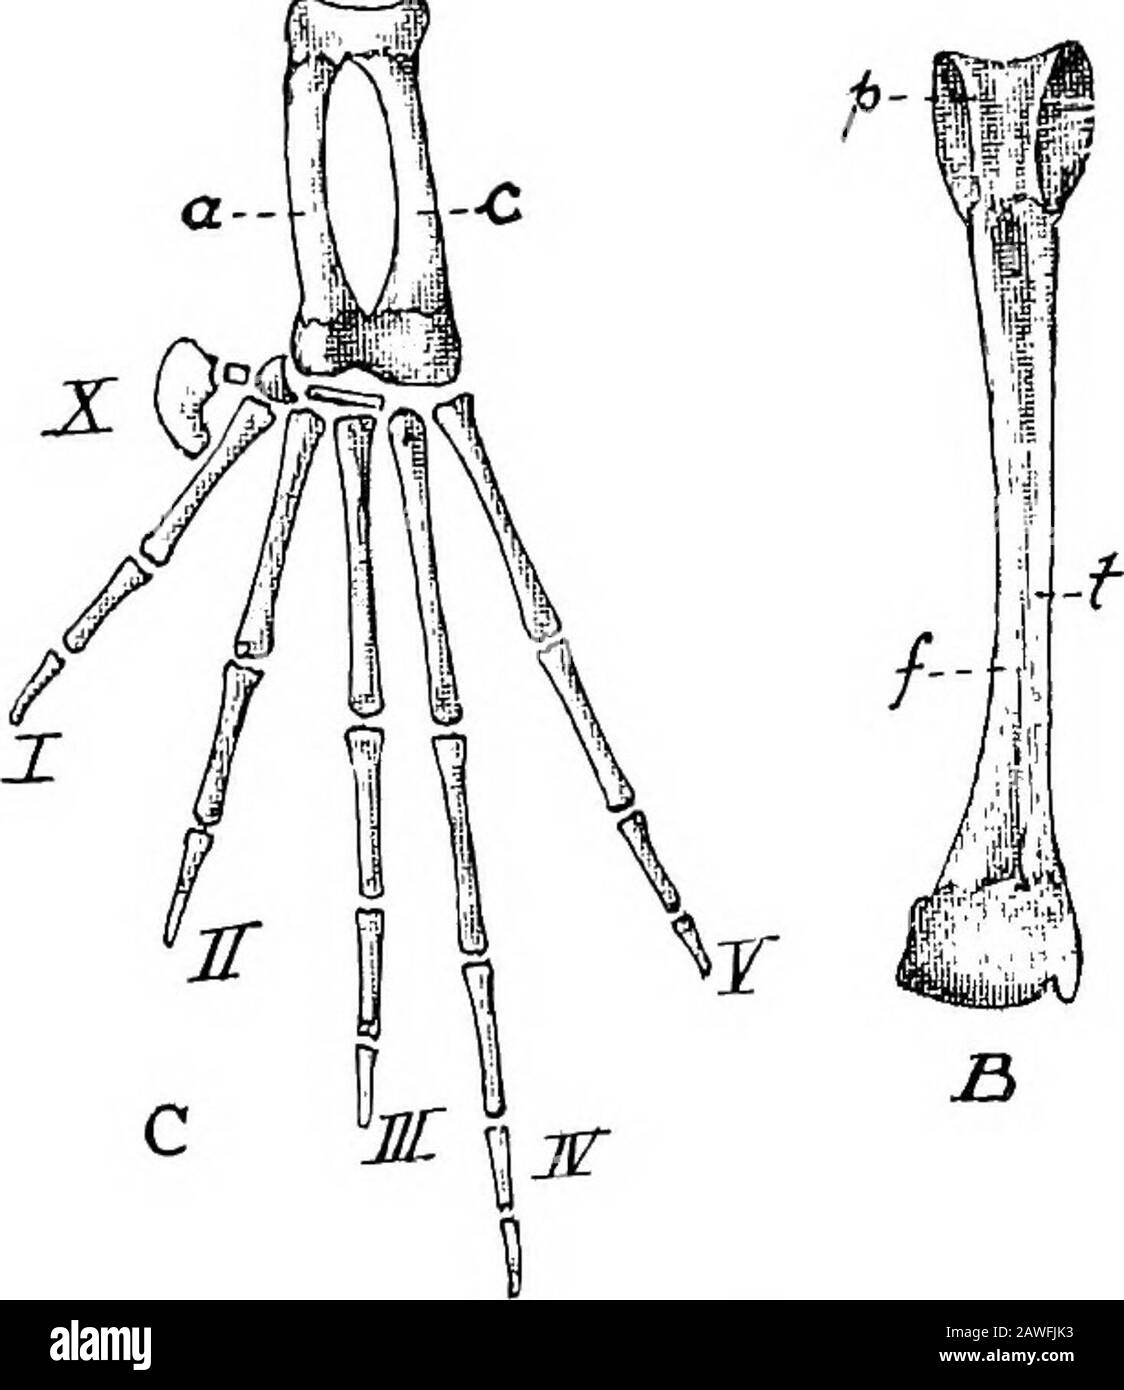 An introduction to the study of the comparative anatomy of animals . espond to theheel-bone (calcaneum) and ankle-bone (astragalus) in man.The further row of tarsals is very much reduced, consisting oftwo tiny pieces of calcified cartilage. One, a flat piece, liesbetween the common epiphysis of the astragalus and cal-caneum and the metatarsal bones of the foot, and is generallyconsidered to correspond to the cuboid of human anatomy.The other piece is a mere nodule on the inner or astragalarside, and is compared with the navicular bone of humananatomy. The foot has six toes. The first is minute Stock Photo